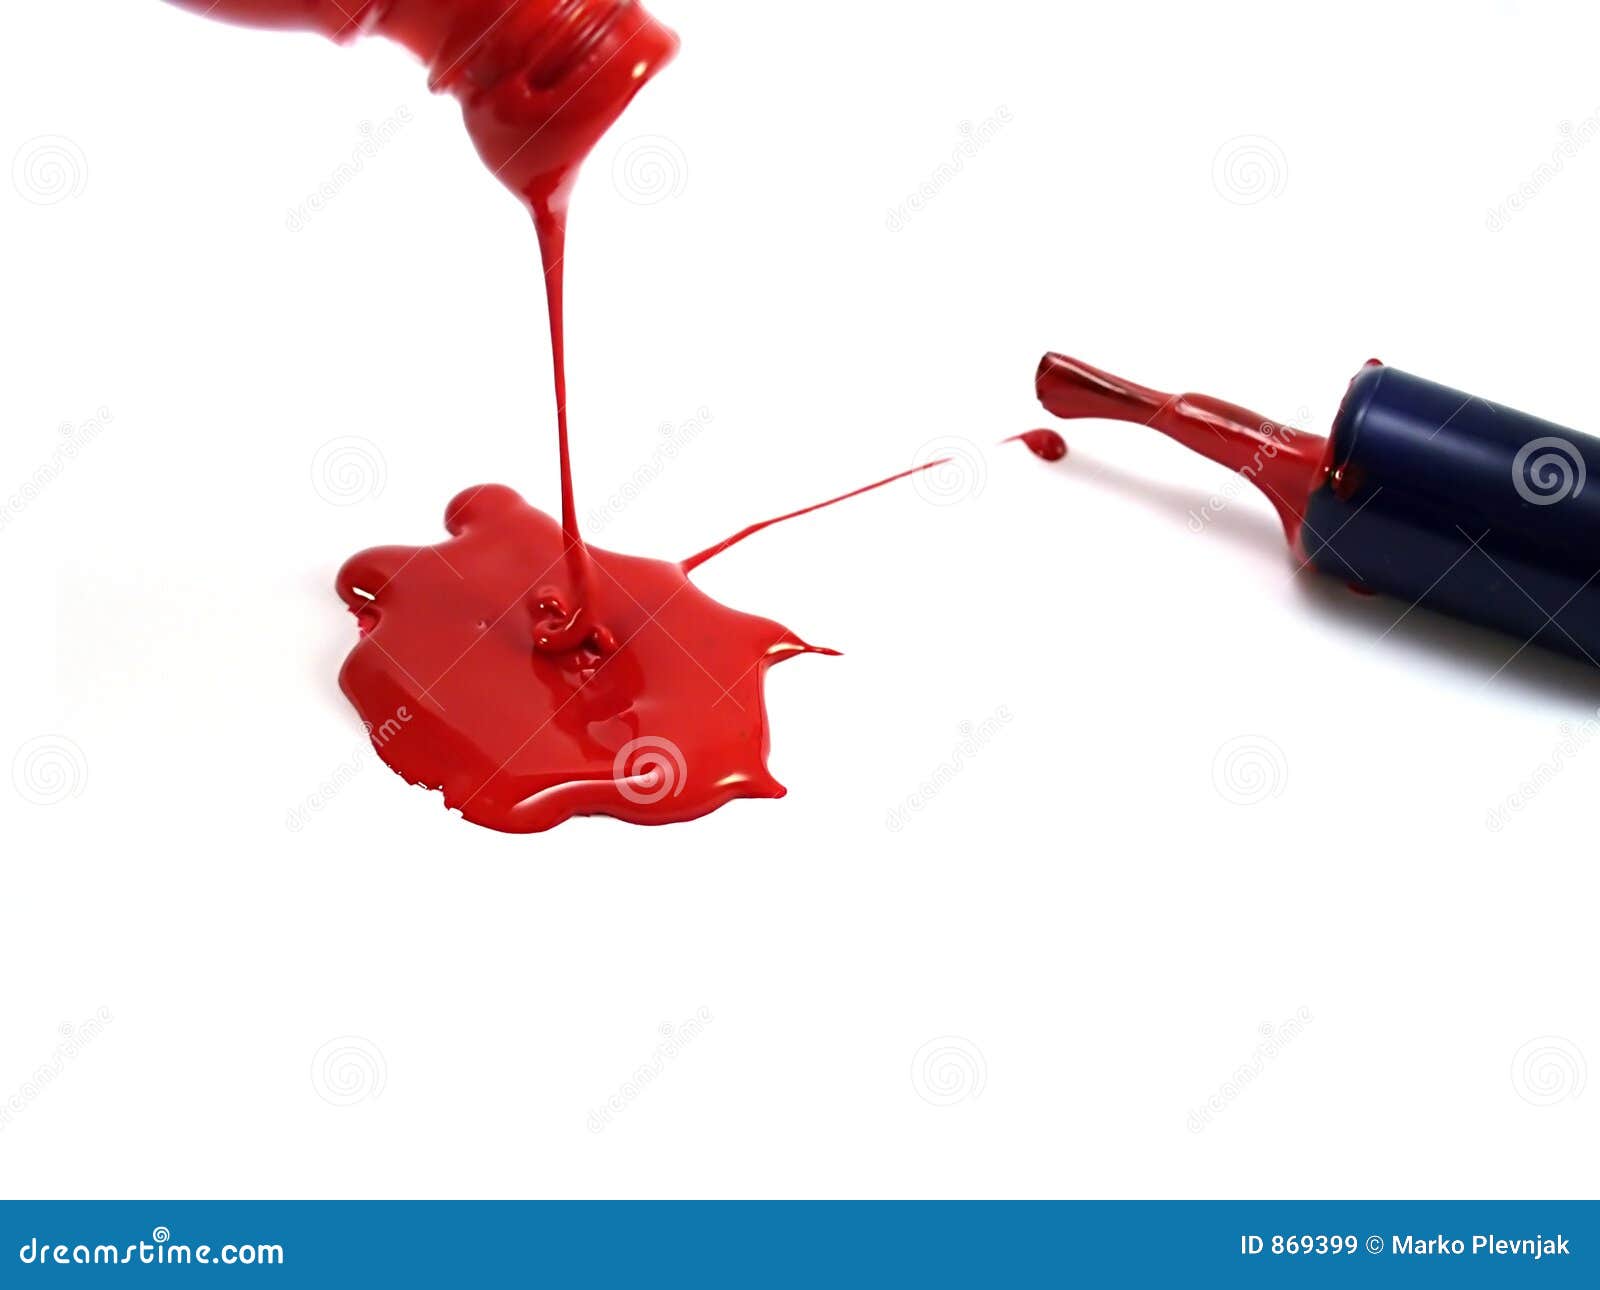 Spilling paint and brush stock image. Image of nail, staines - 869399